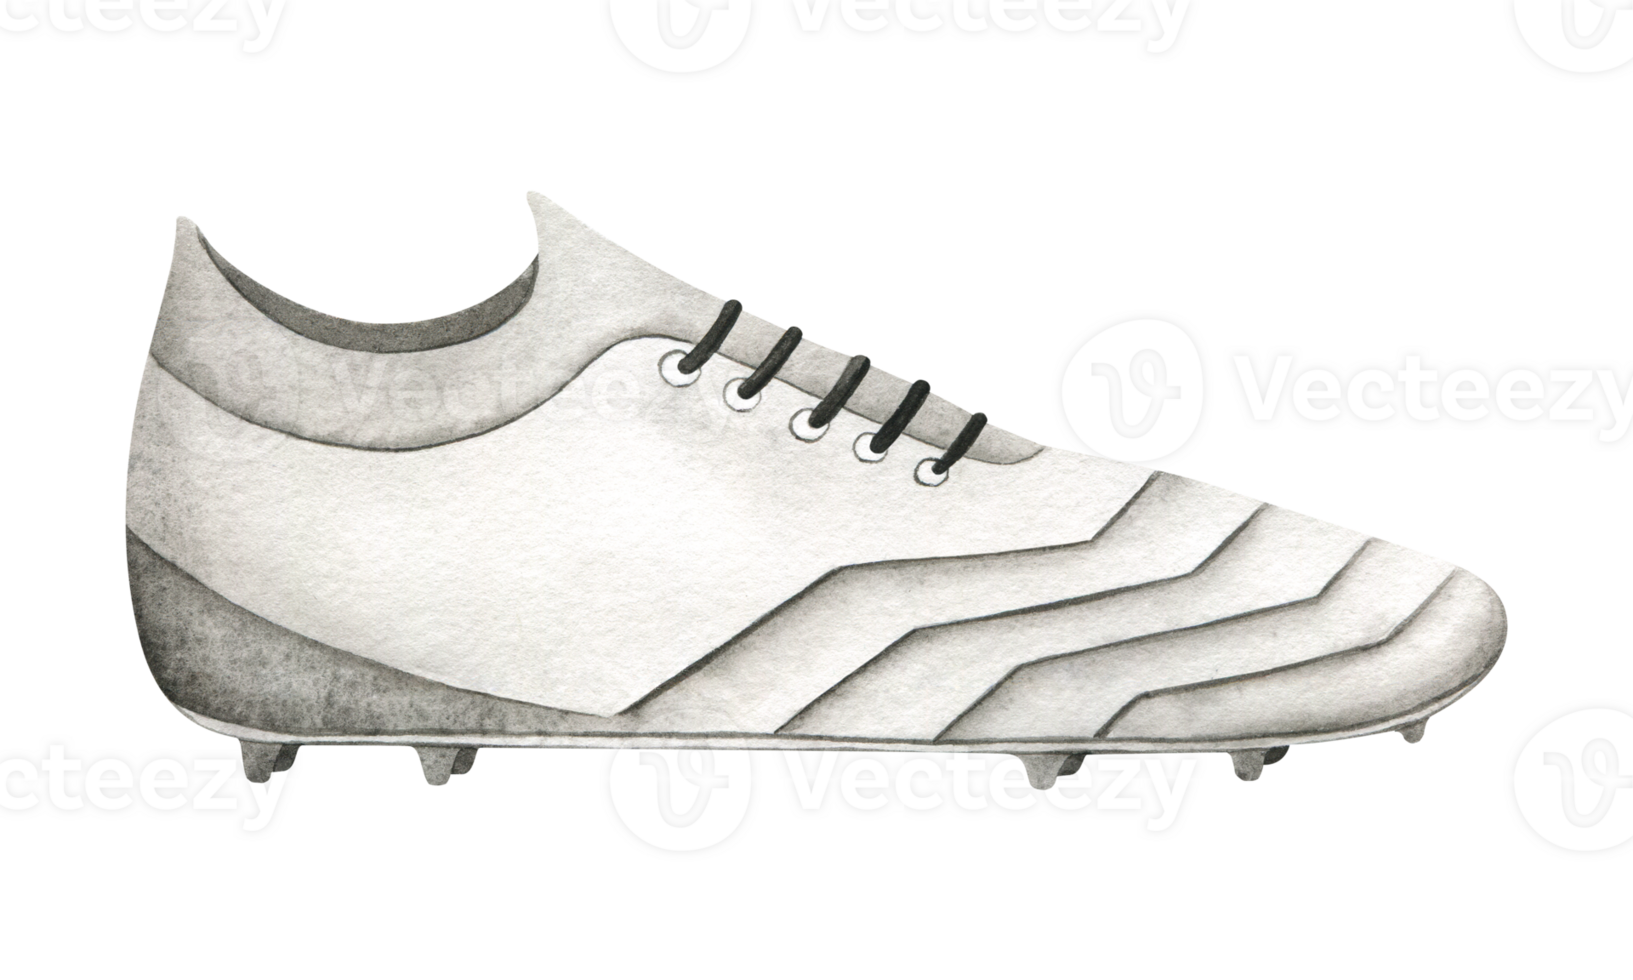 Soccer cleats. Soccer Shoe for playing football or rugby. Shoes with studded soles. Player uniform. Watercolor illustration. Isolated. For football club, sporting goods stores, poster and postcard png